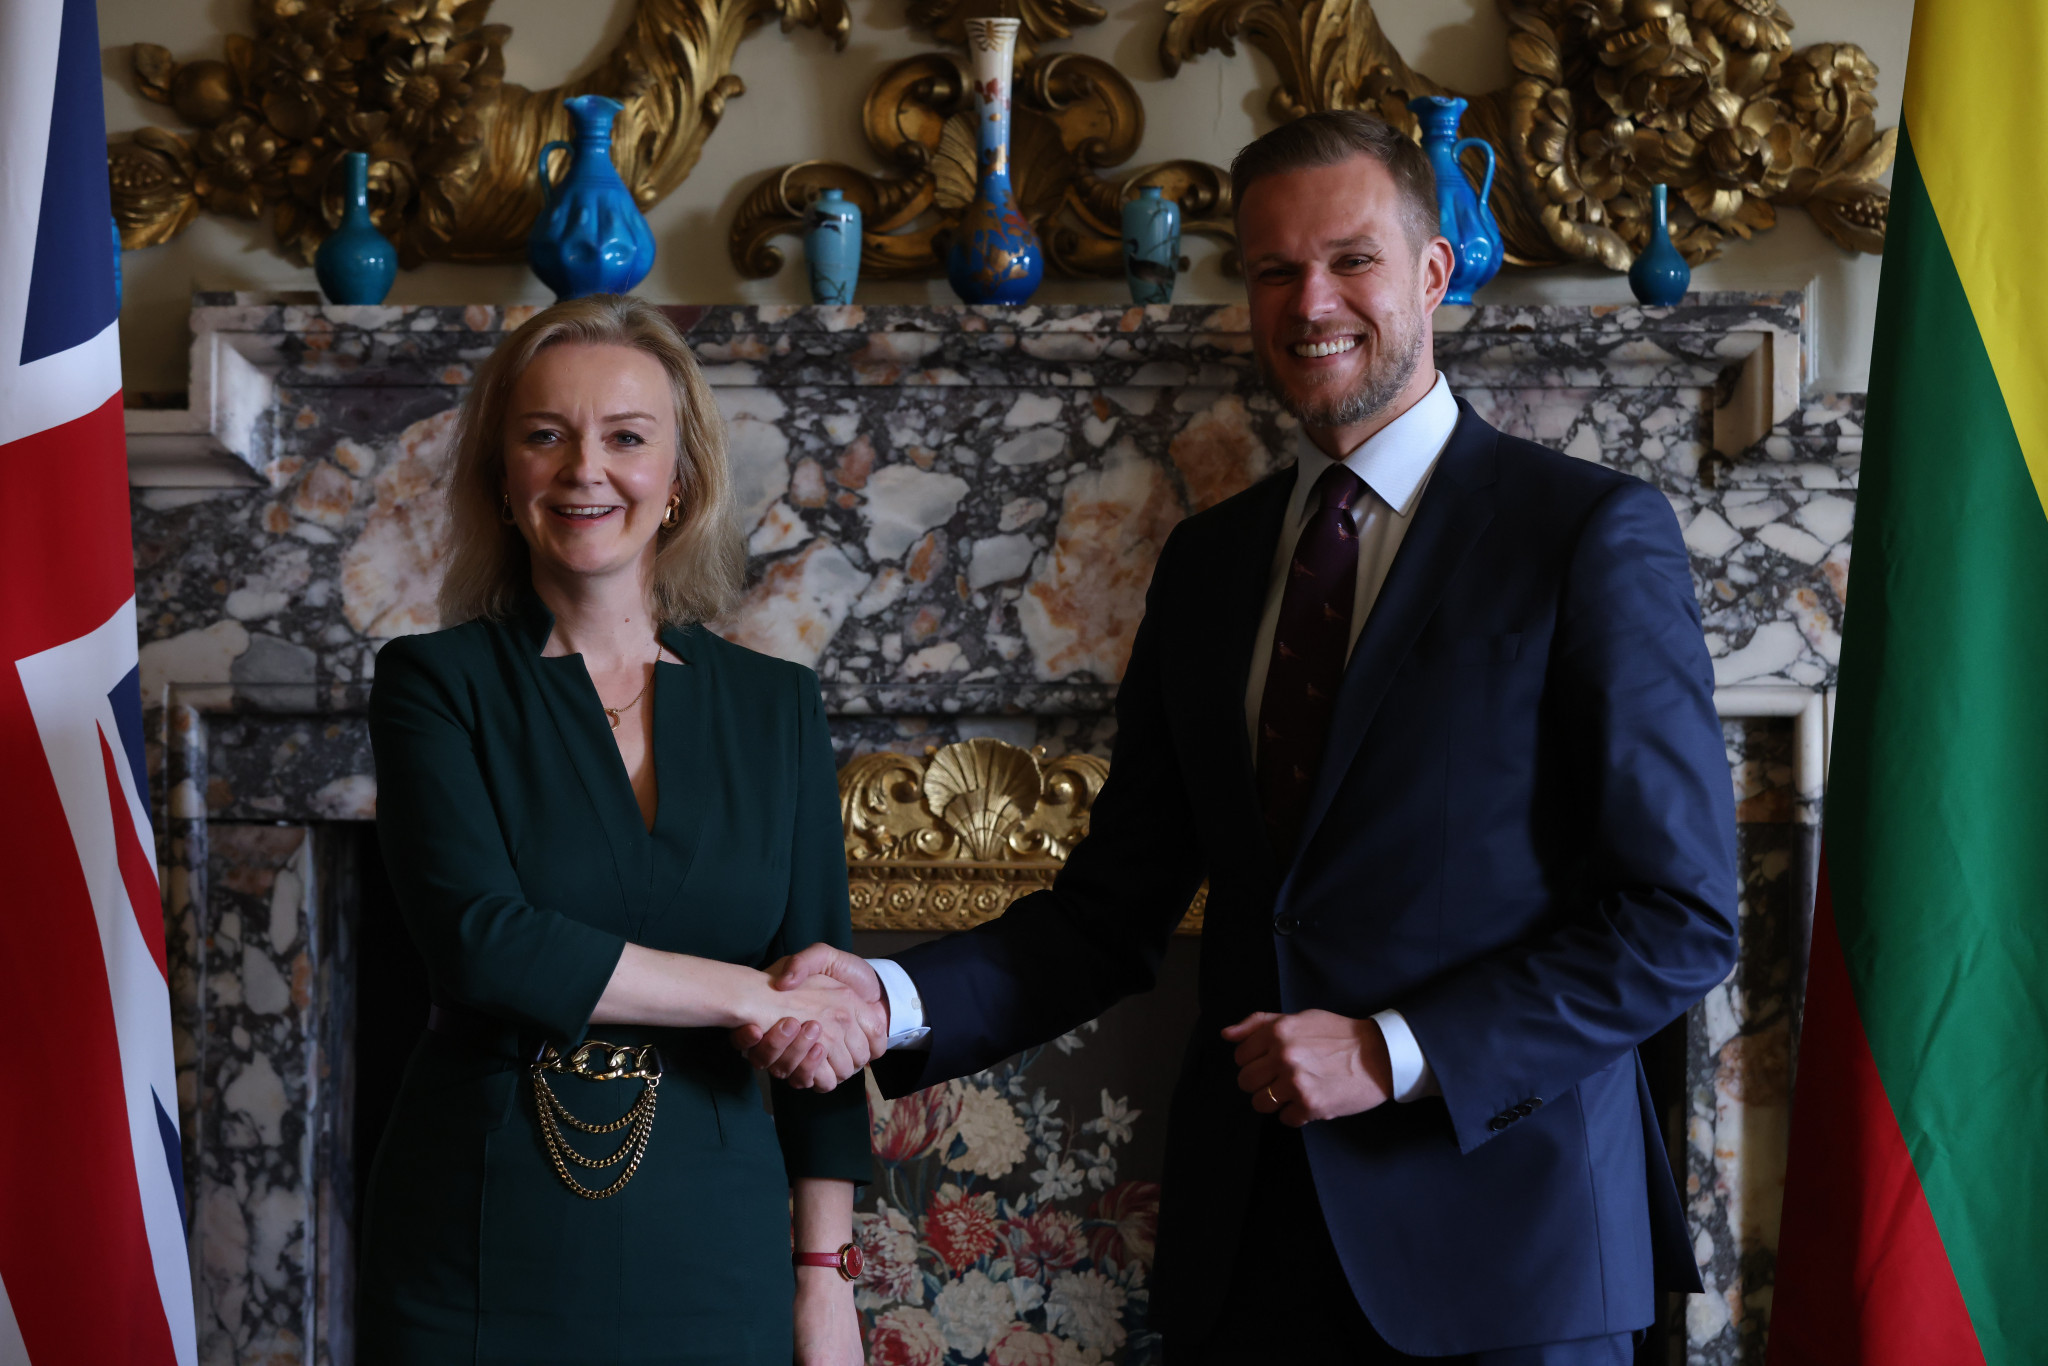 Lithuania's Foreign Minister Gabrielius Landsbergis, right, has confirmed he will not be attending Beijing 2022, while Britain are also not sending any Government officials, including its Foreign Minister Liz Truss, left, to the Winter Olympic Games in the Chinese capital ©Getty Images